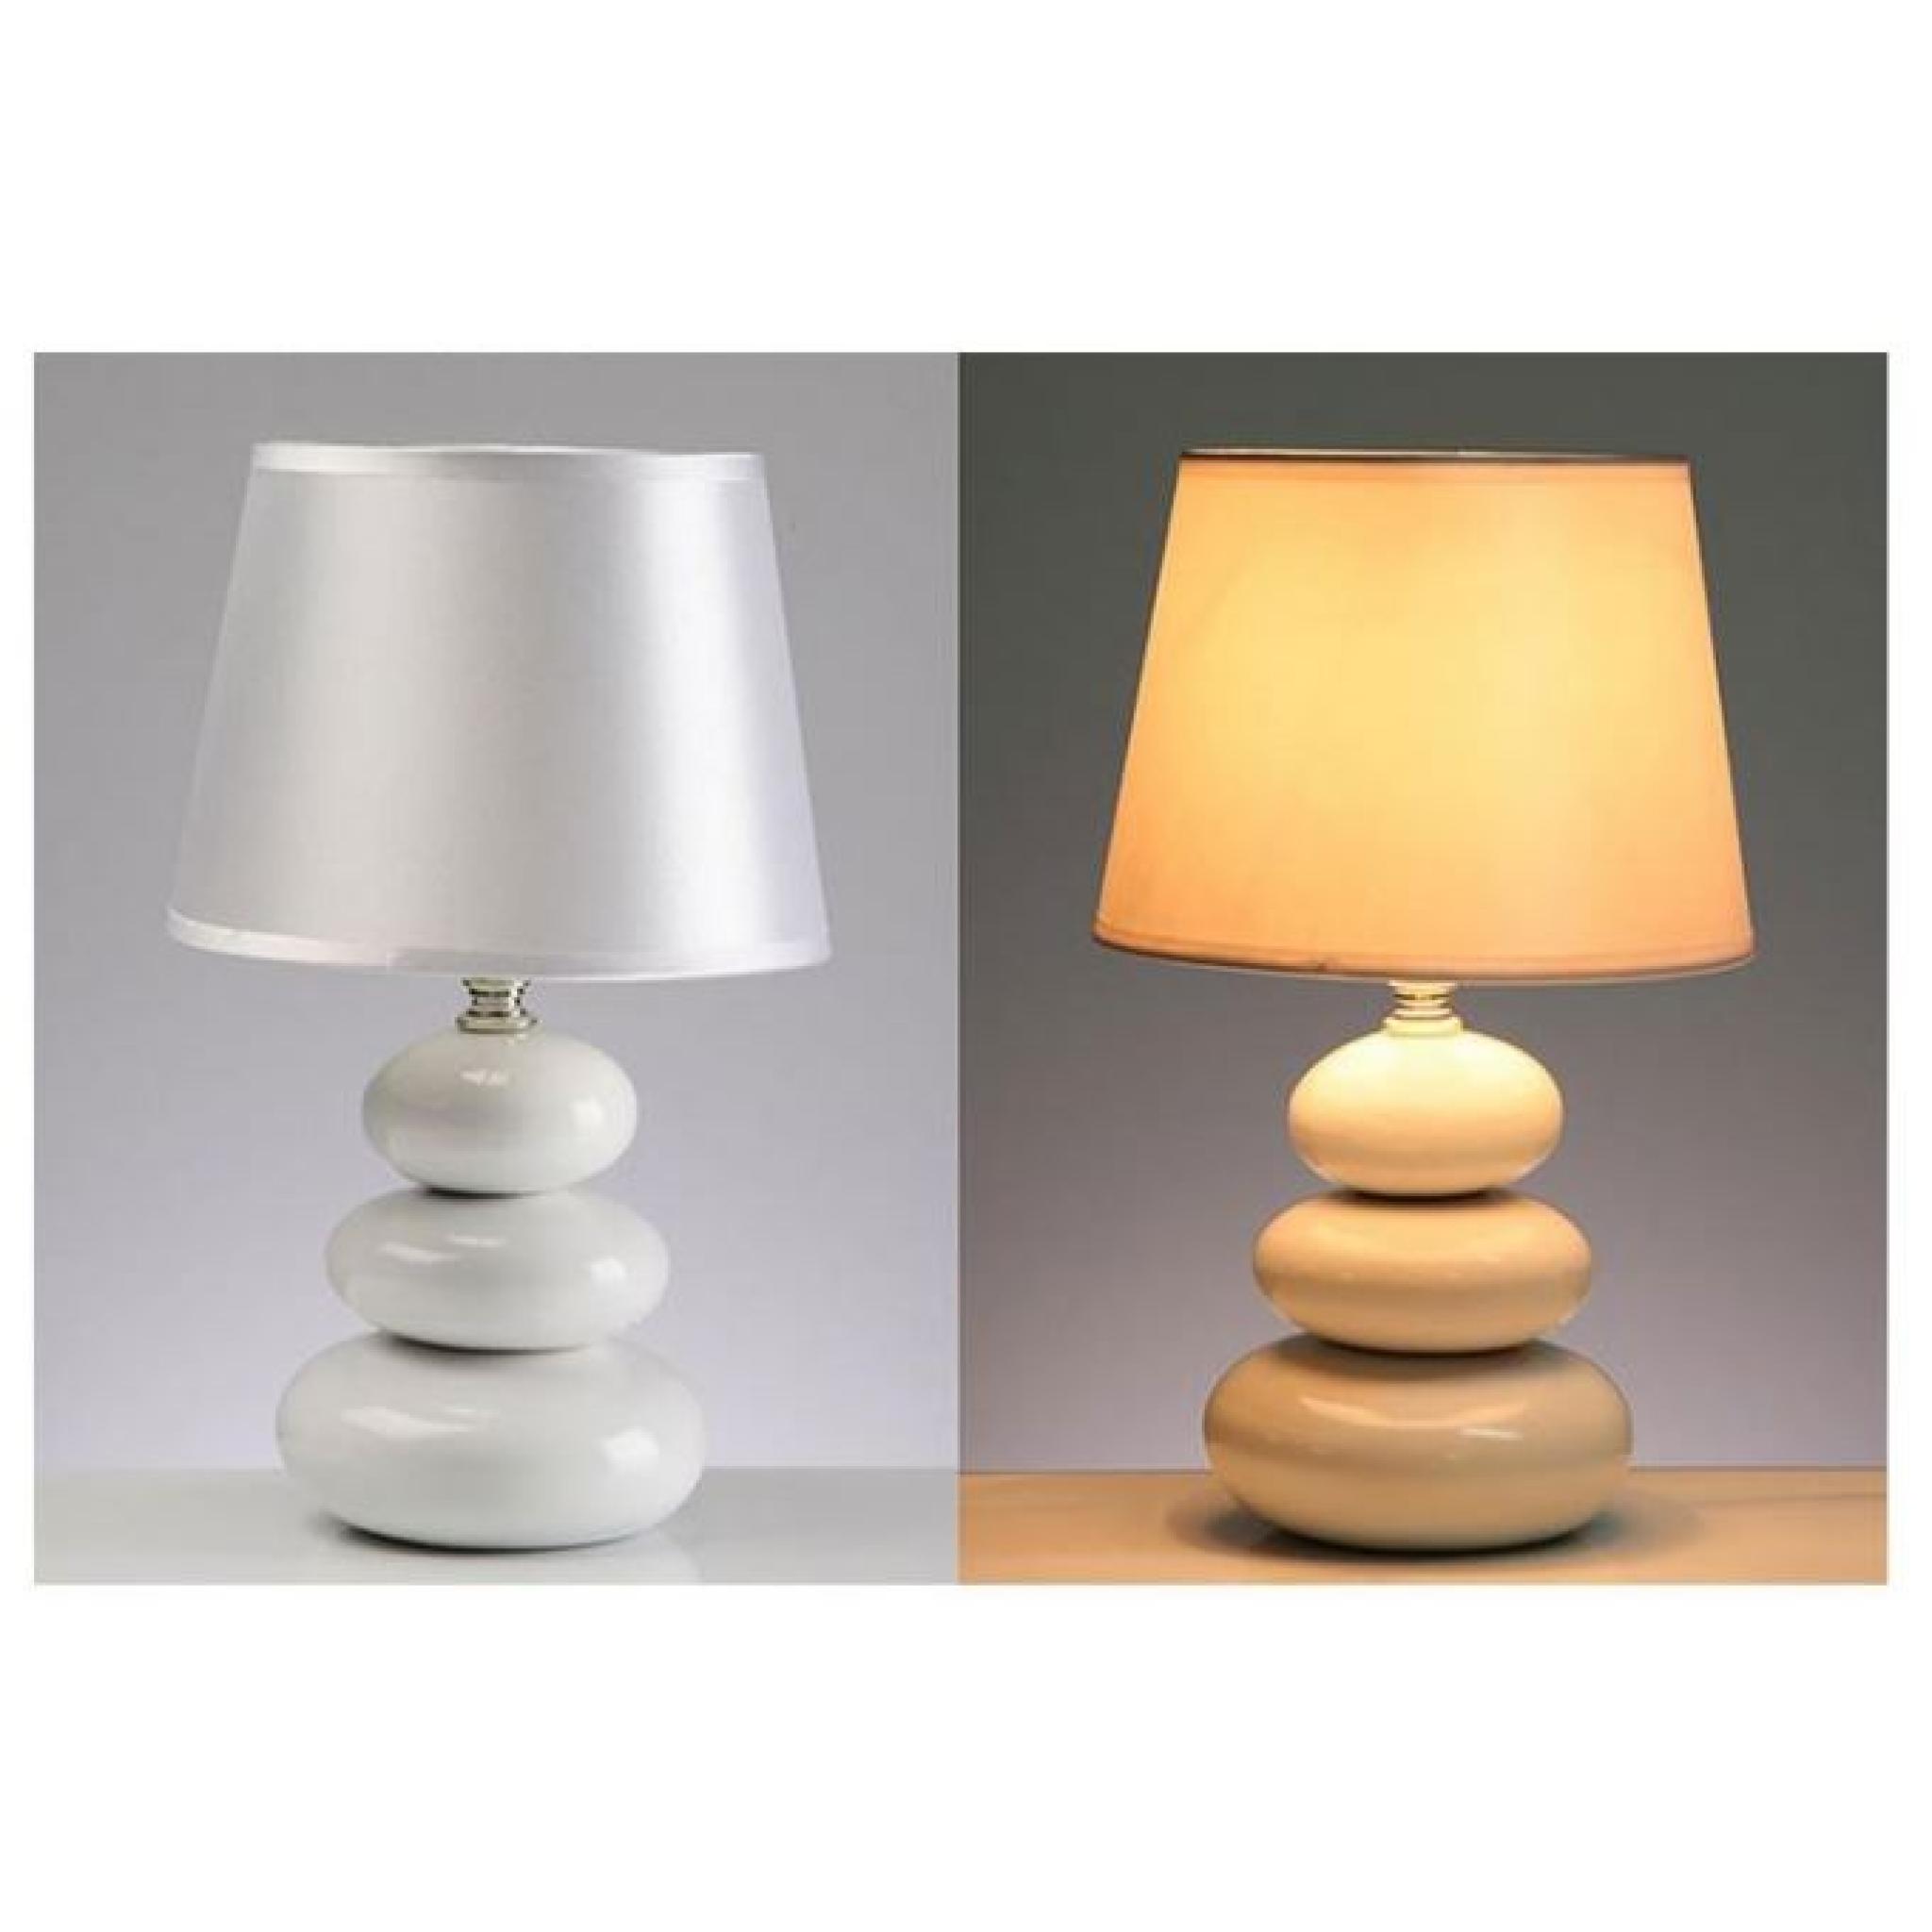 Lampe galet blanche Playa pas cher